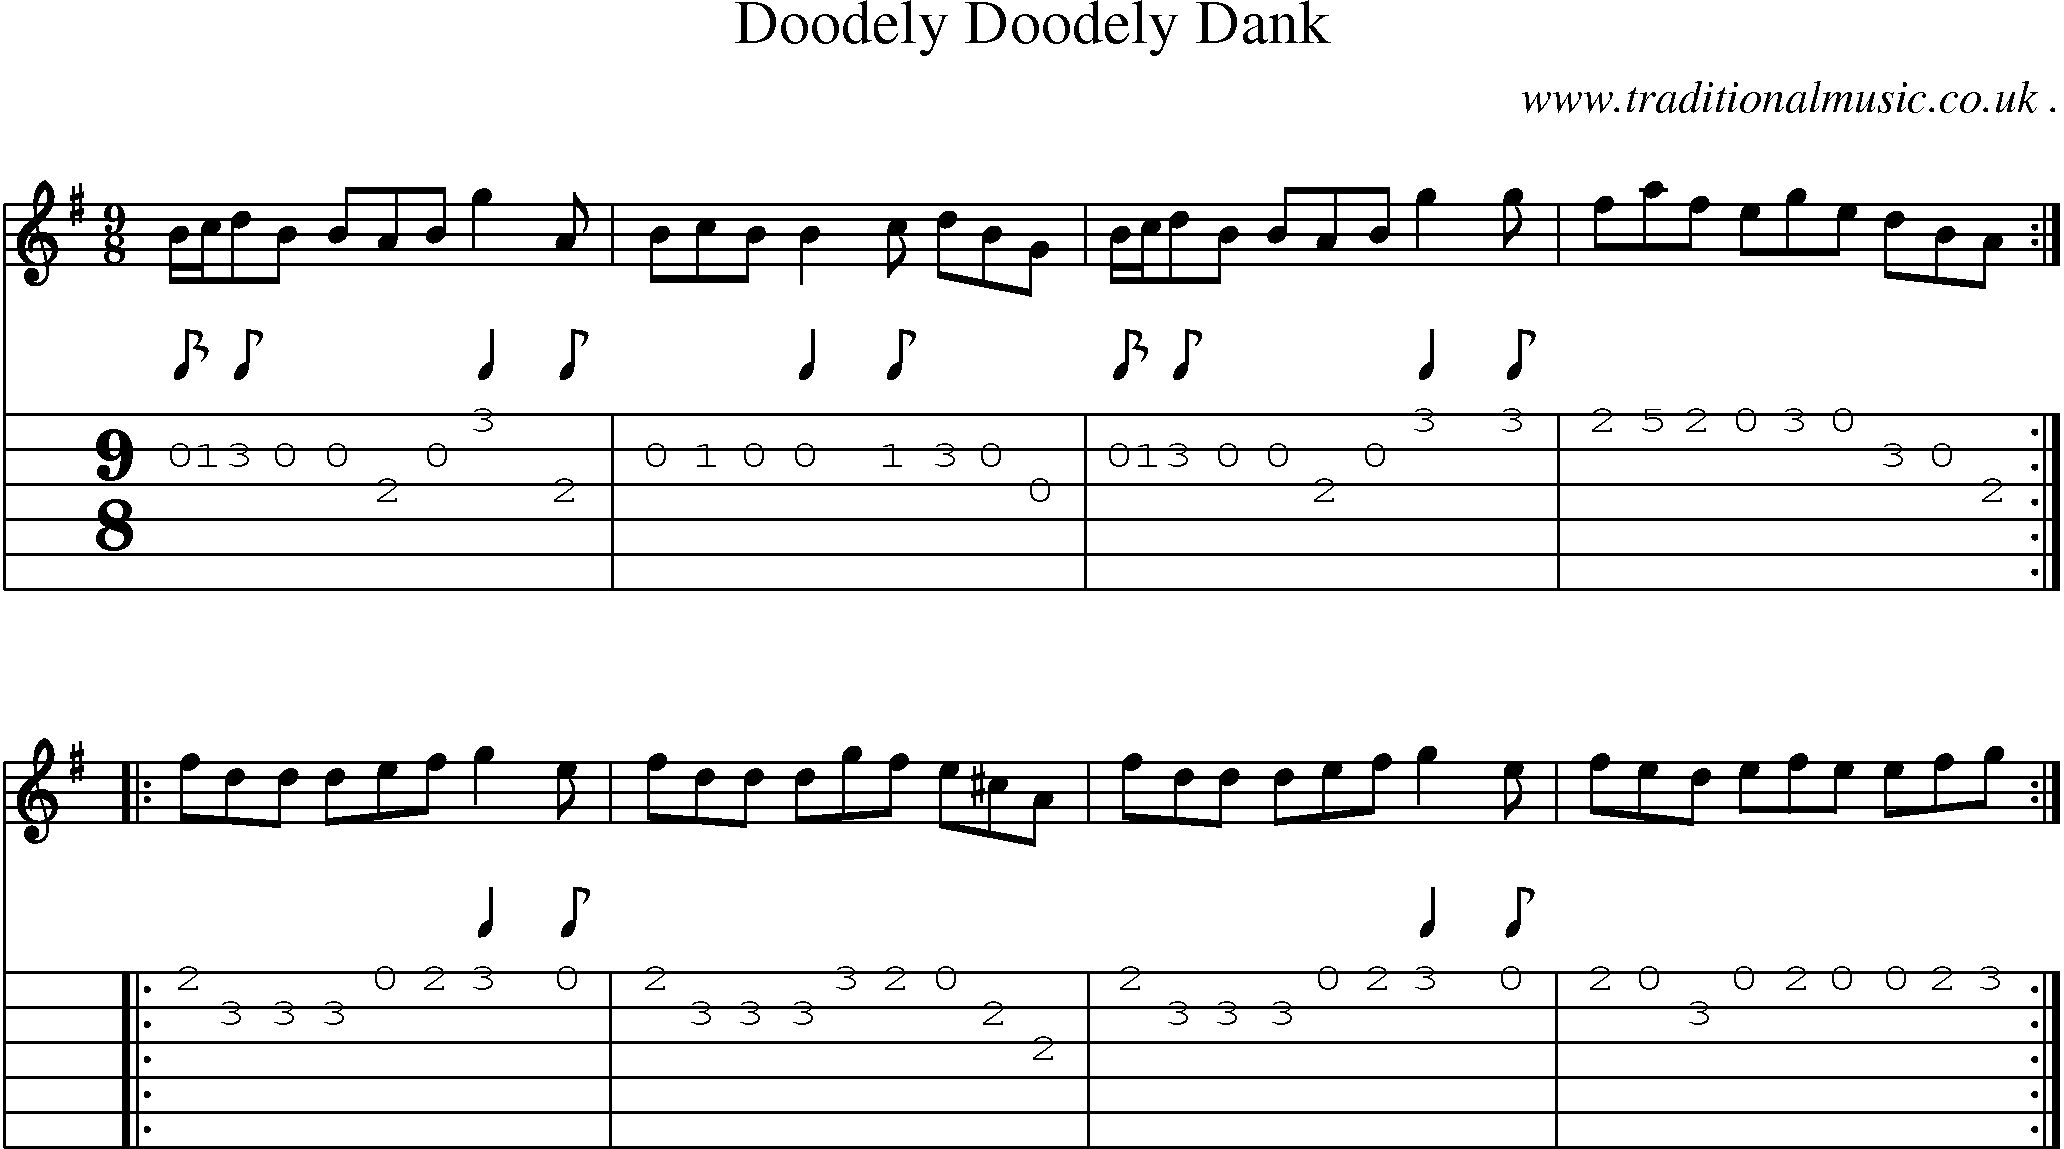 Sheet-Music and Guitar Tabs for Doodely Doodely Dank